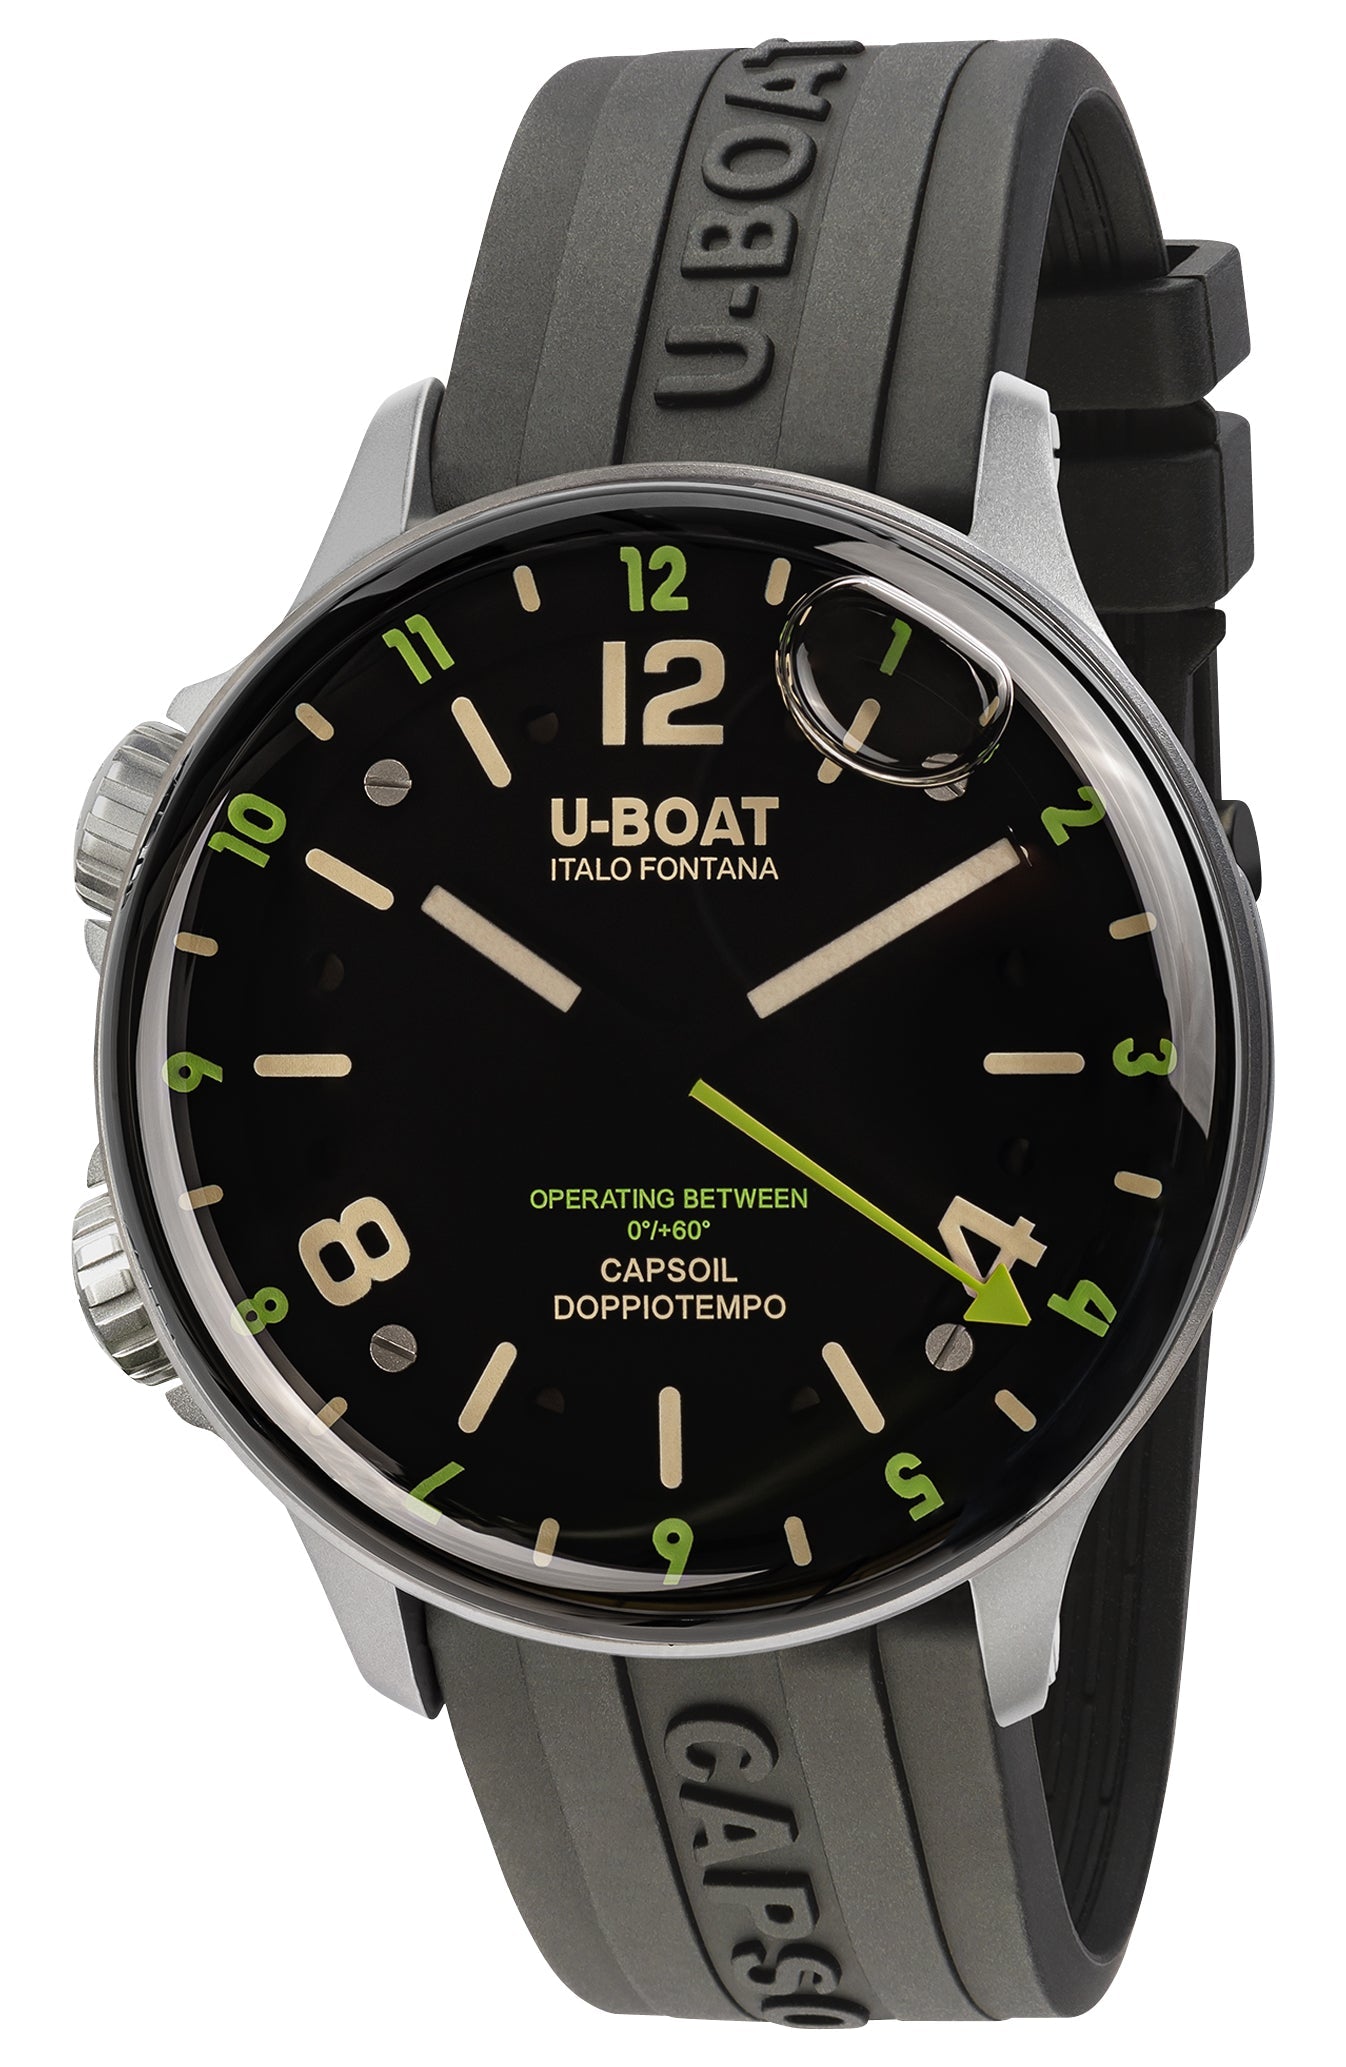 update alt-text with template Watches - Mens-U-Boat-8838-12-hour display, 40 - 45 mm, 45 - 50 mm, bi-directional rotating bezel, black, Capsoil Doppiotempo, dual time zone, mens, menswatches, new arrivals, round, rpSKU_8769, rpSKU_8770, rpSKU_8839, rpSKU_8840, rpSKU_8841, rubber, stainless steel case, swiss automatic, swiss quartz, U-Boat, watches-Watches & Beyond